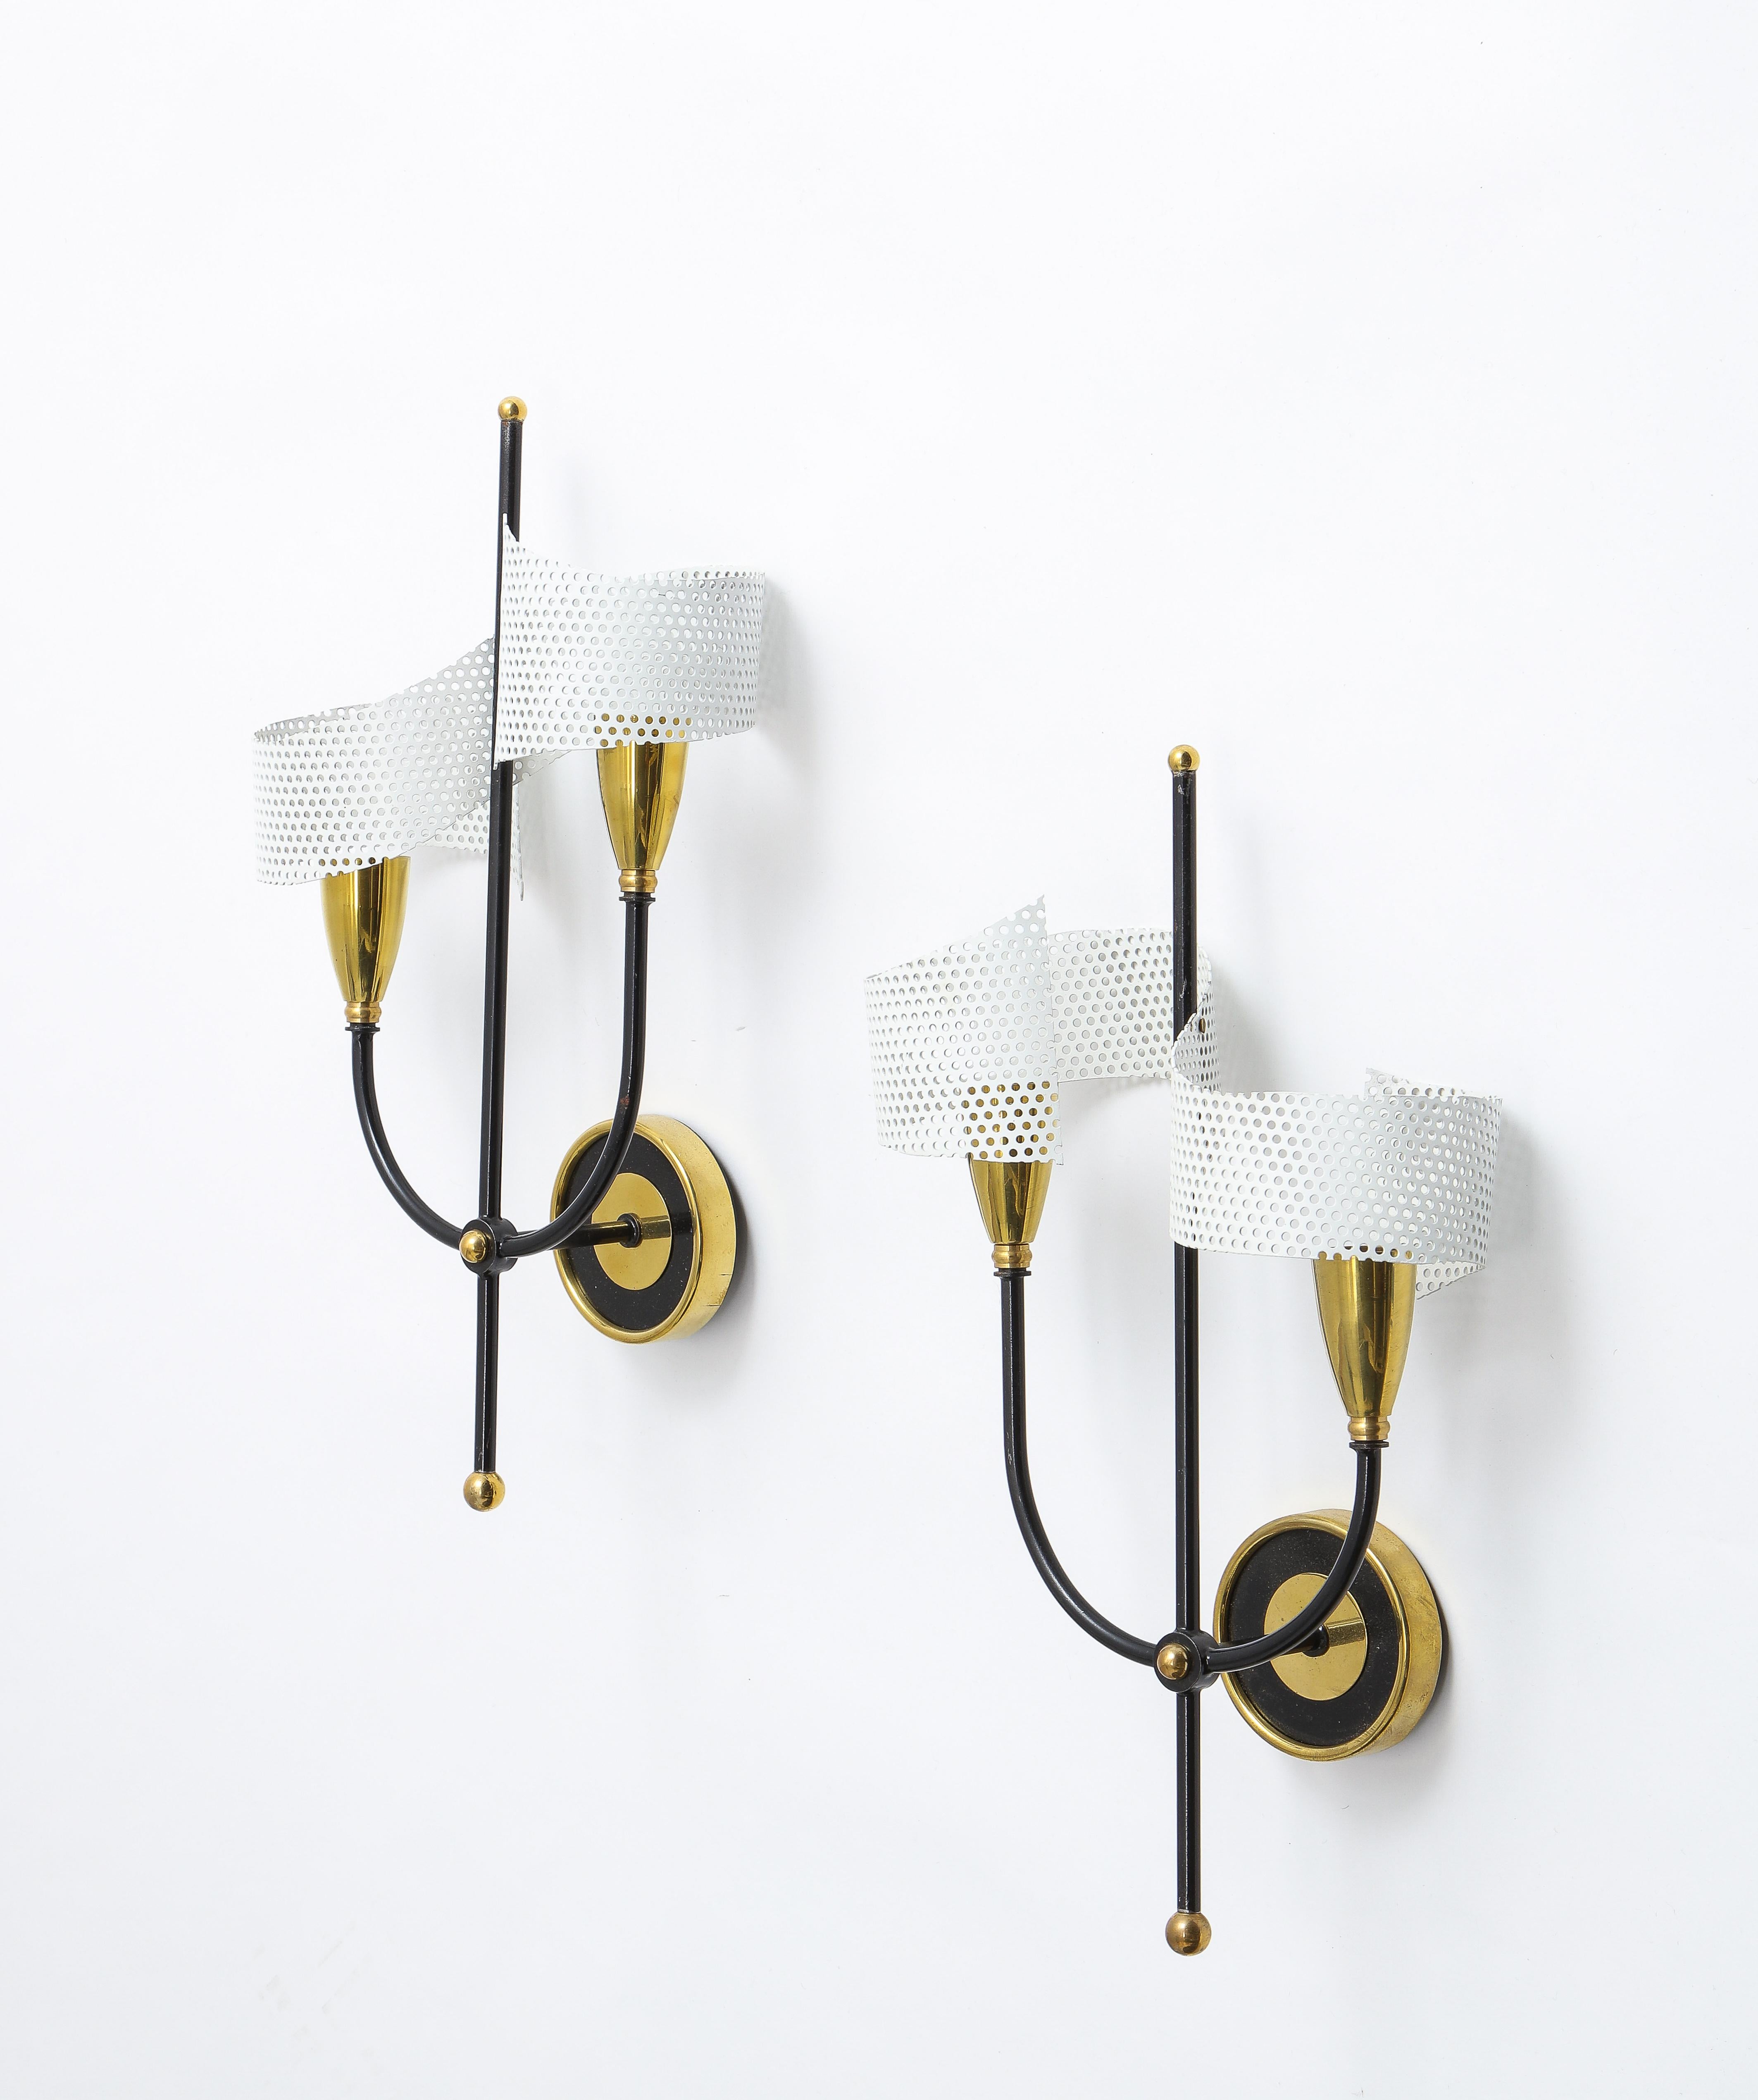 Pair of sconces in black enameled aluminum and brass with white enameled scroll rigitule shades in the style of Mategot, two lights, rewired.